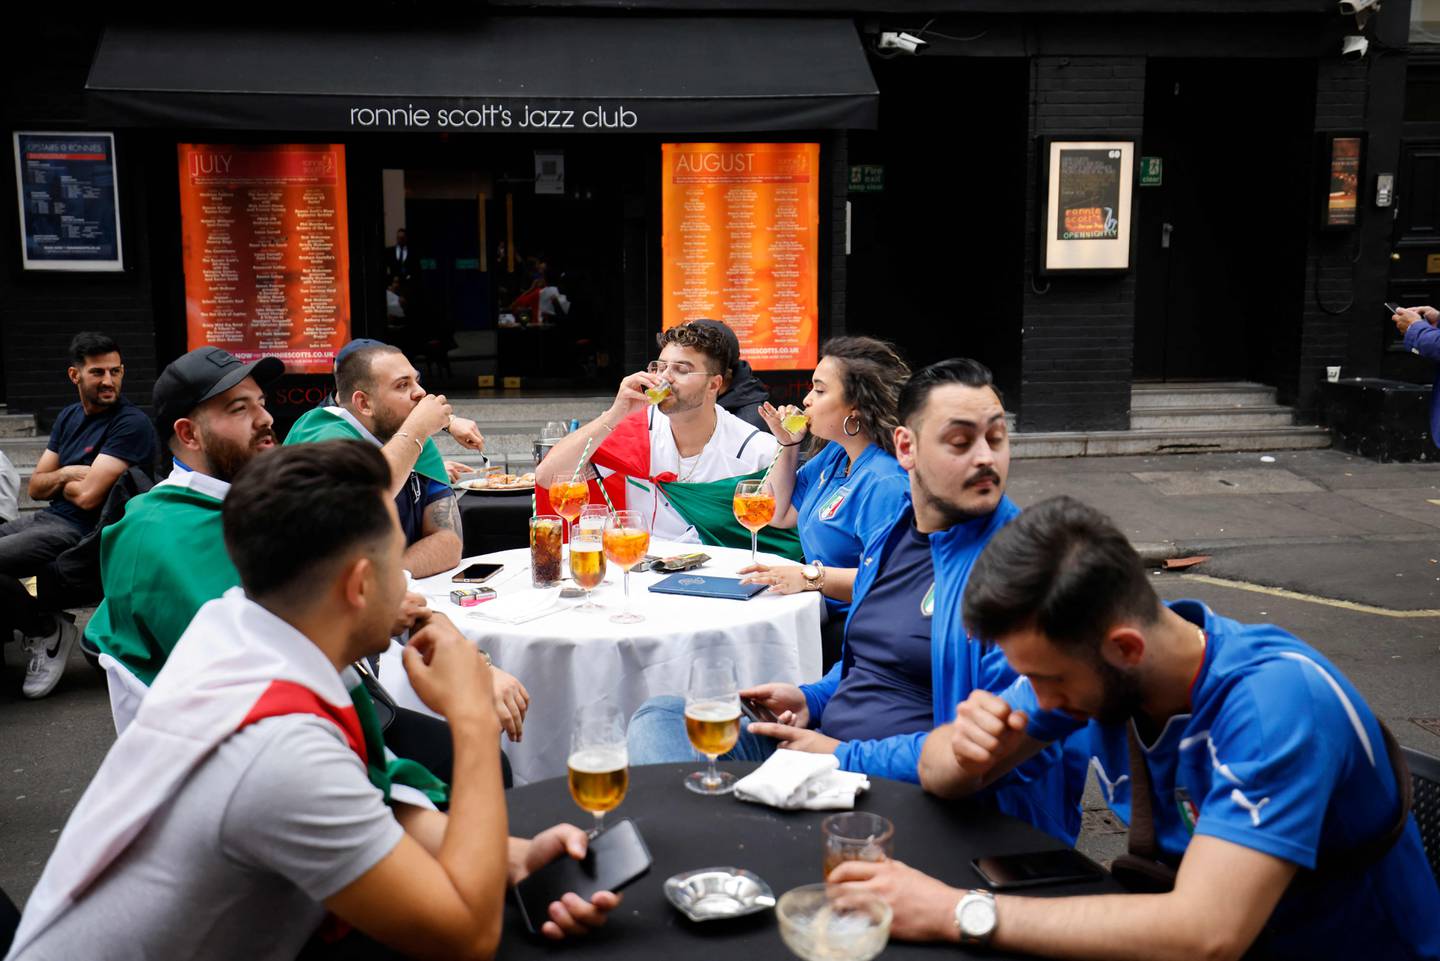 Italian football fans enjoy a drink before the recent Euro 2020 final at Wembley. AFP

